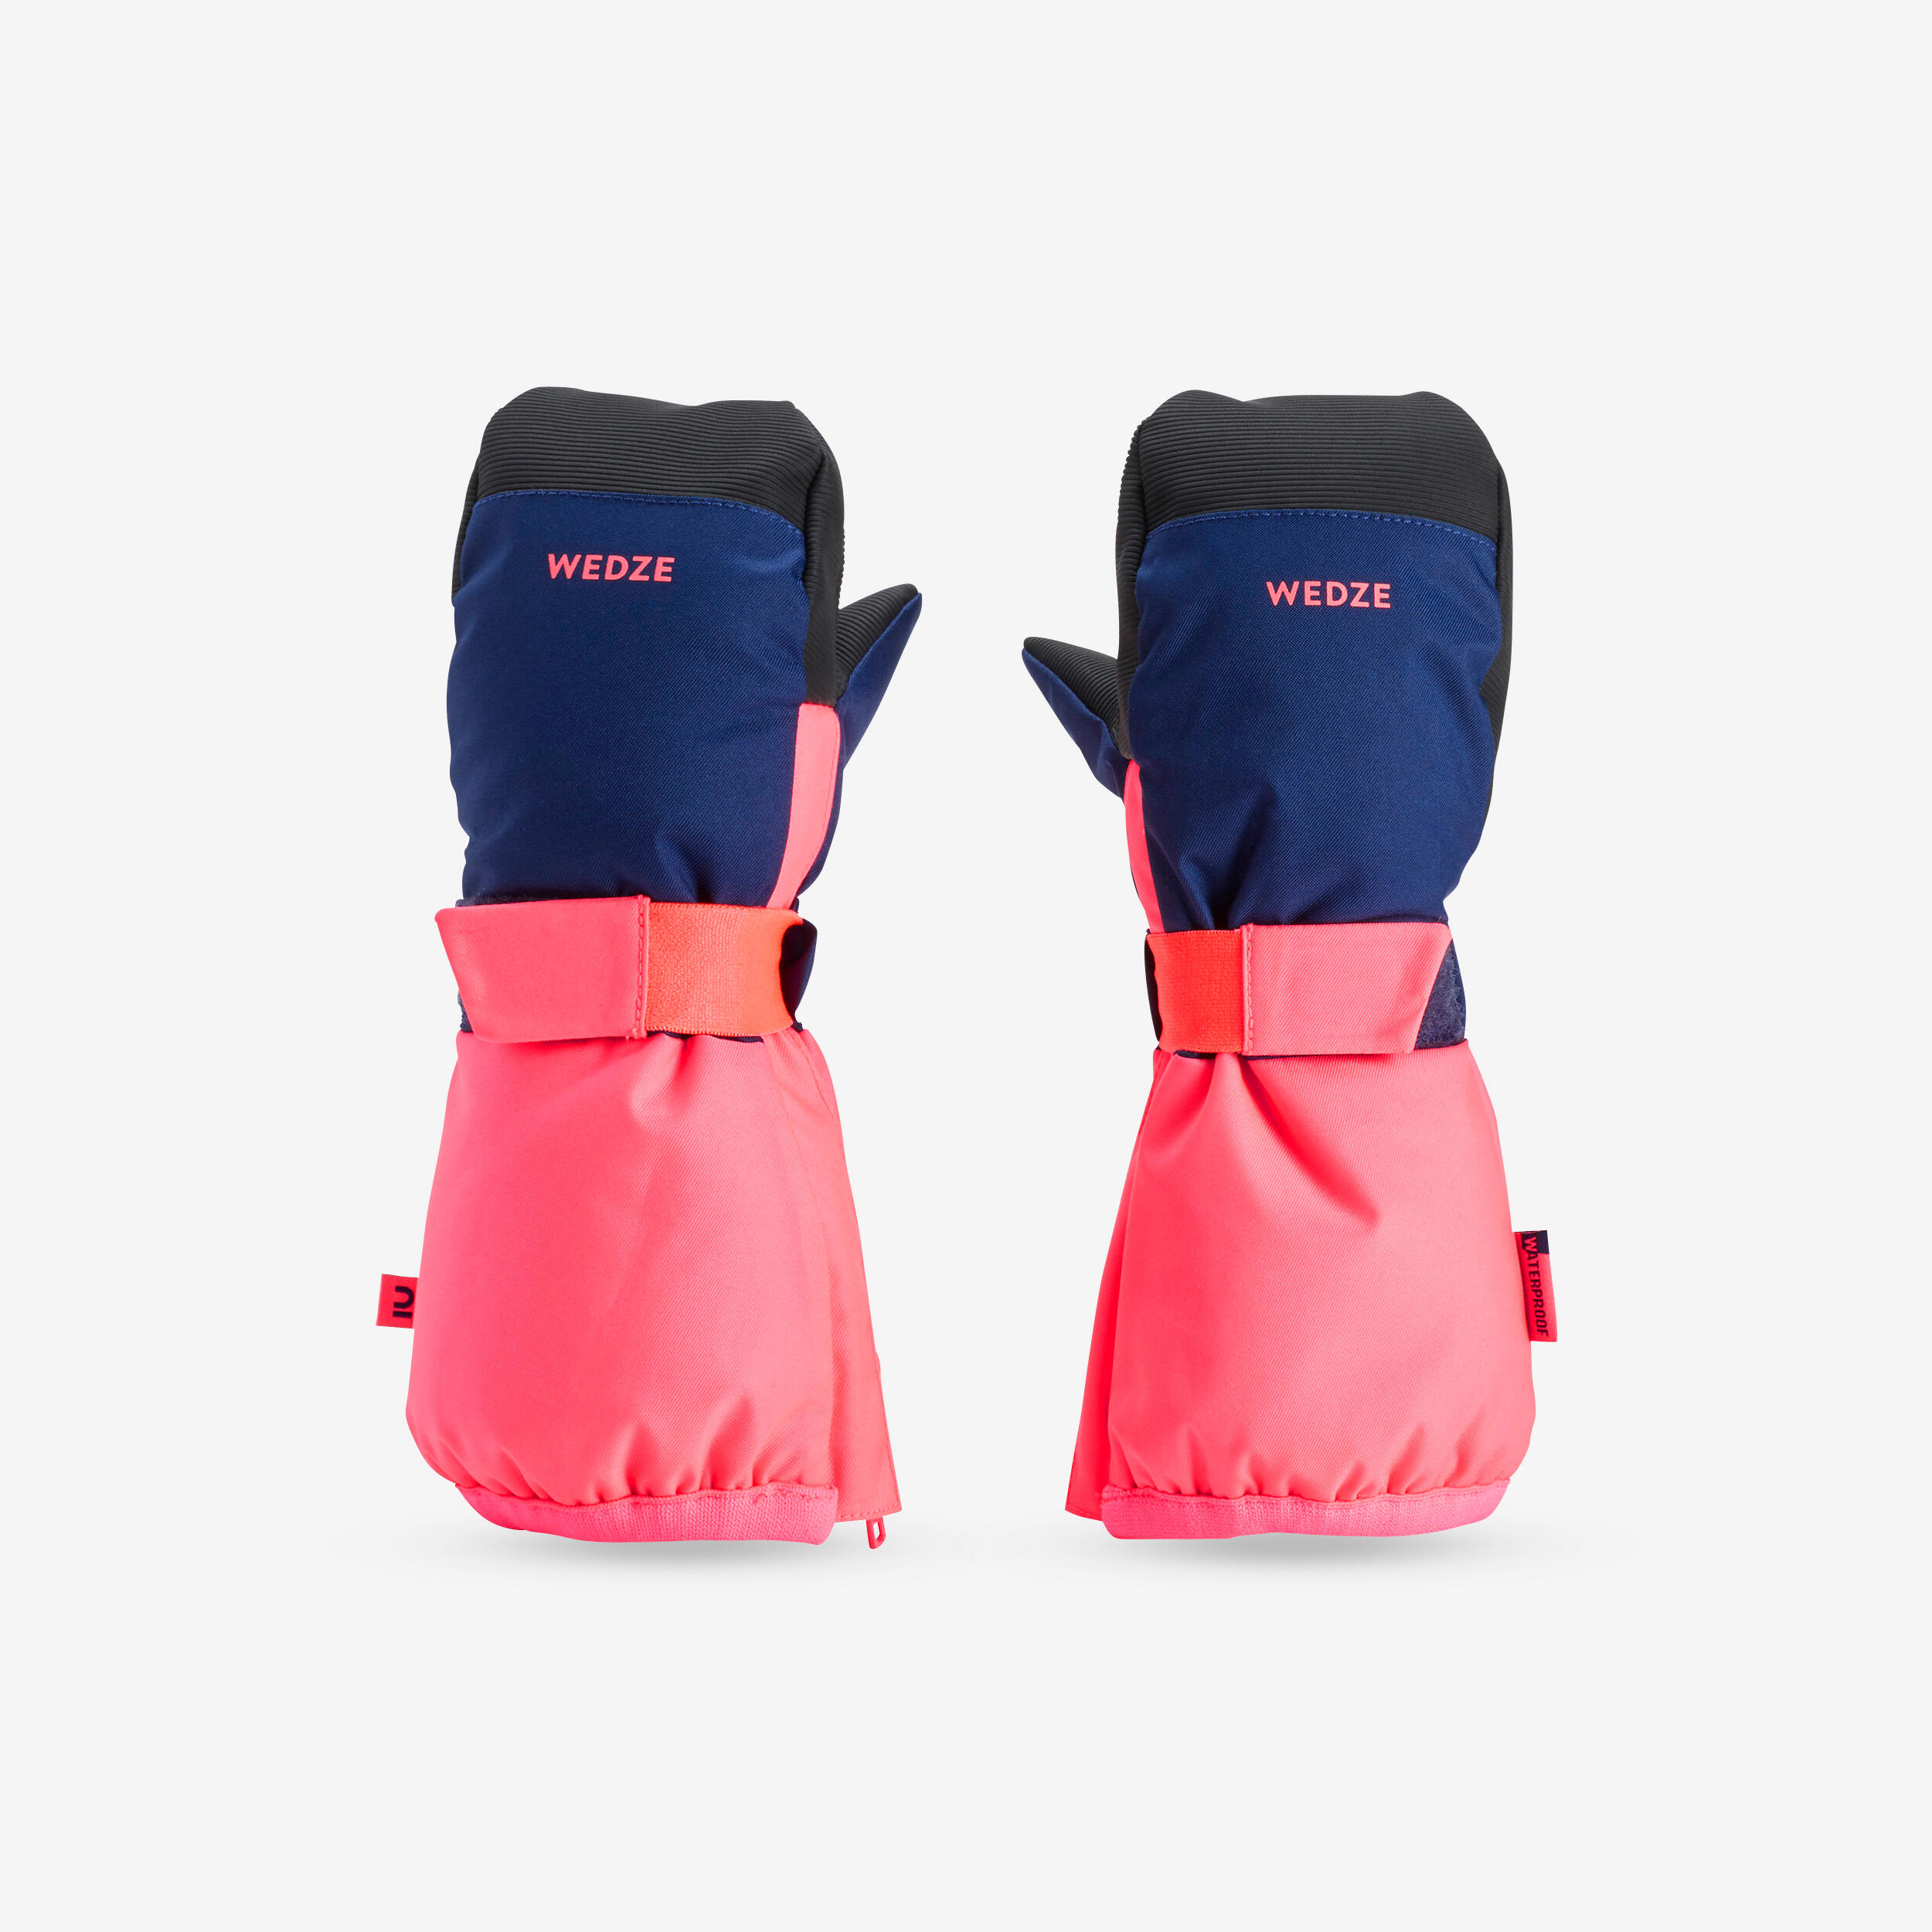 WARM AND WATERPROOF CHILDREN'S SKI MITTENS BLUE AND PINK 1/4